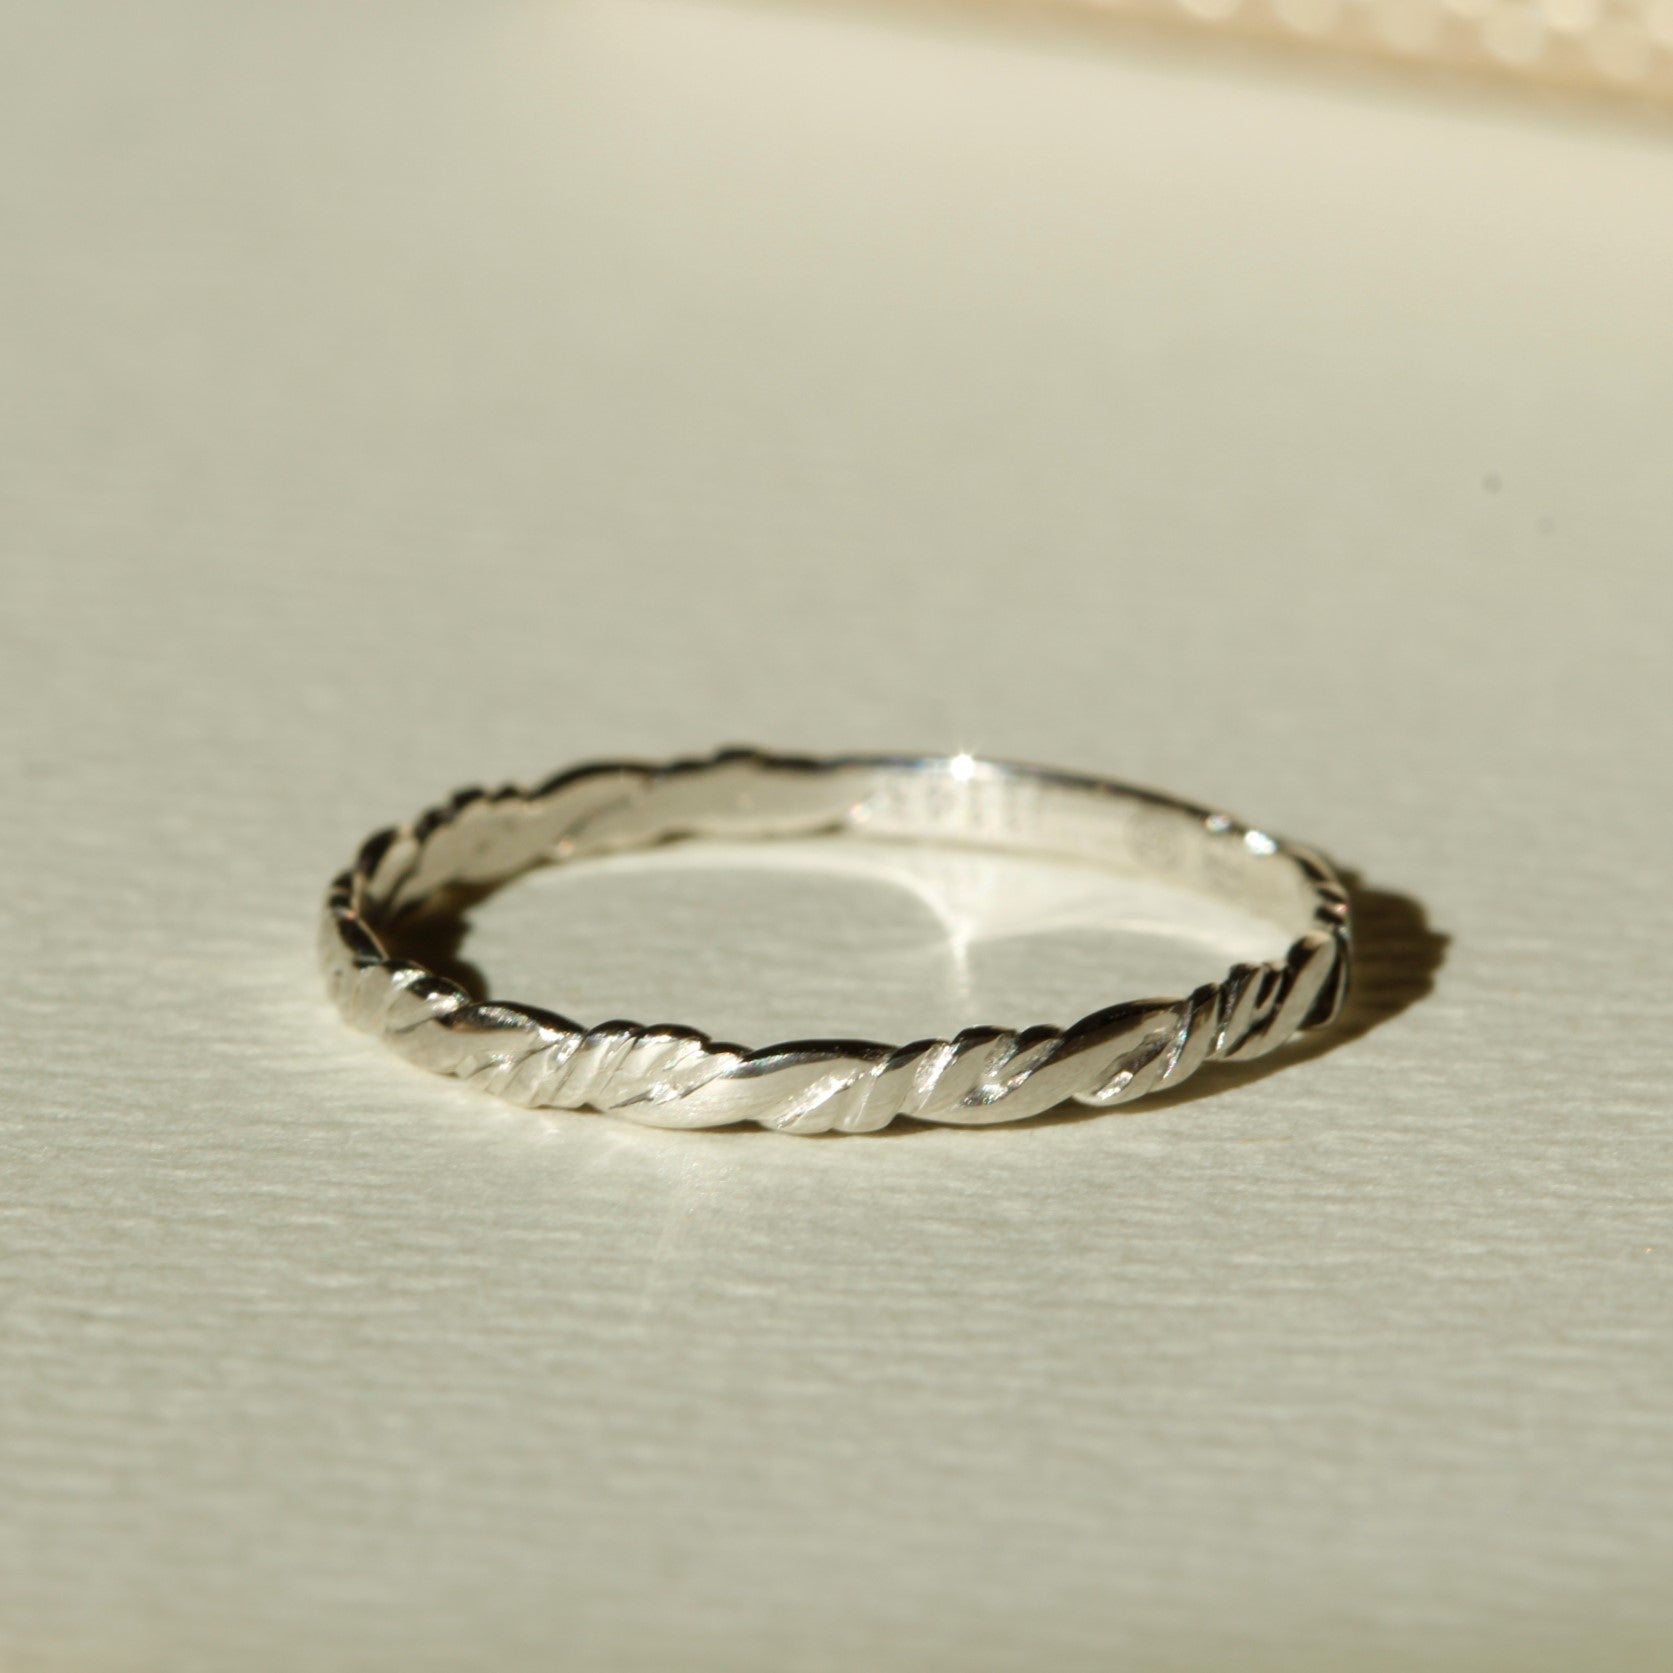 Womens Wedding Ring in 18k White Gold or Platinum with a twisted pattern or filigrie